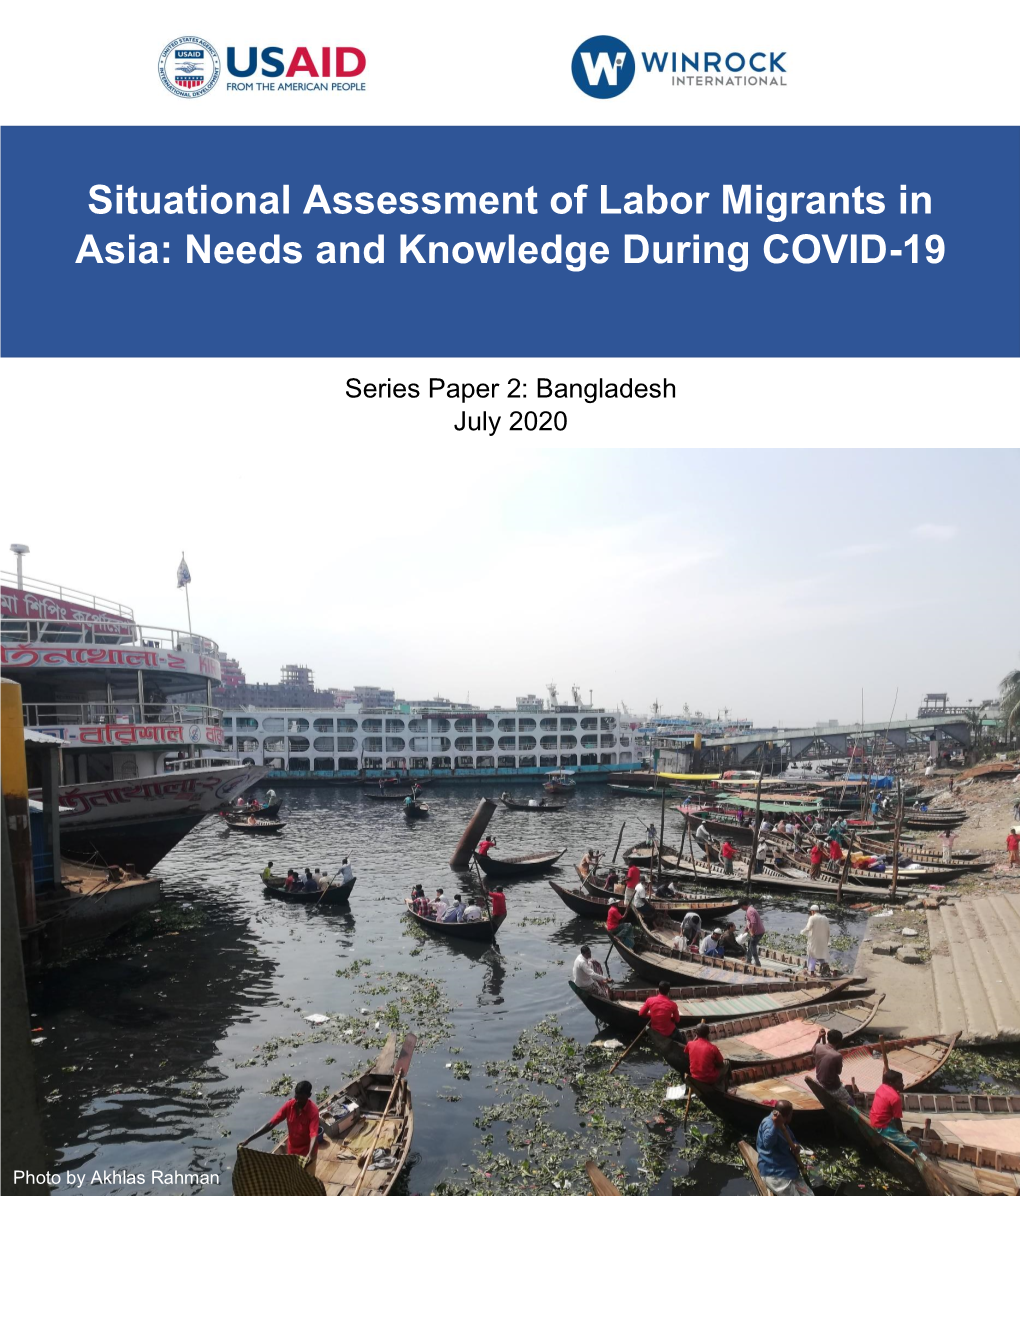 Situational Assessment of Labor Migrants in Asia: Needs and Knowledge During COVID-19